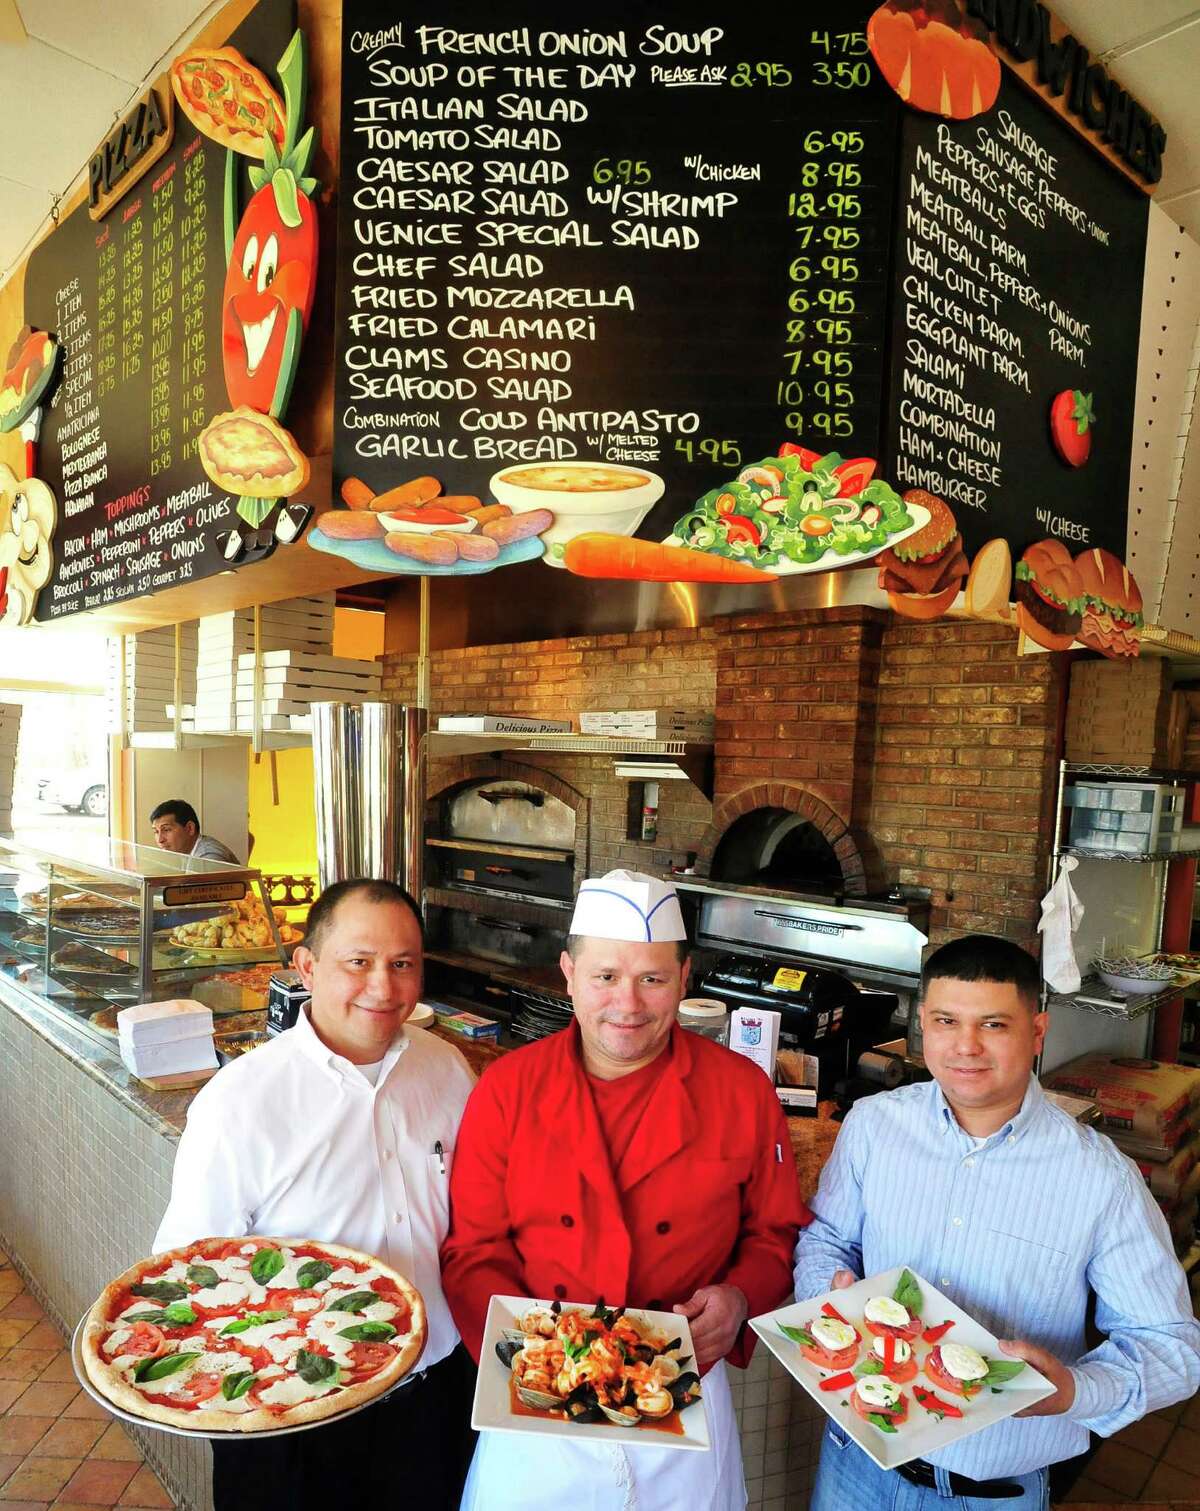 Left to right are Joey Escobar, with a Margherita Pizza; German Escobar, with Zuppa de Pesce; and Jose Caballero, with fresh mozzarella caprese. All three are owners of Venice Restaurant & Pizza, in Ridgefield, Conn. Wednesday, April 3, 2013.